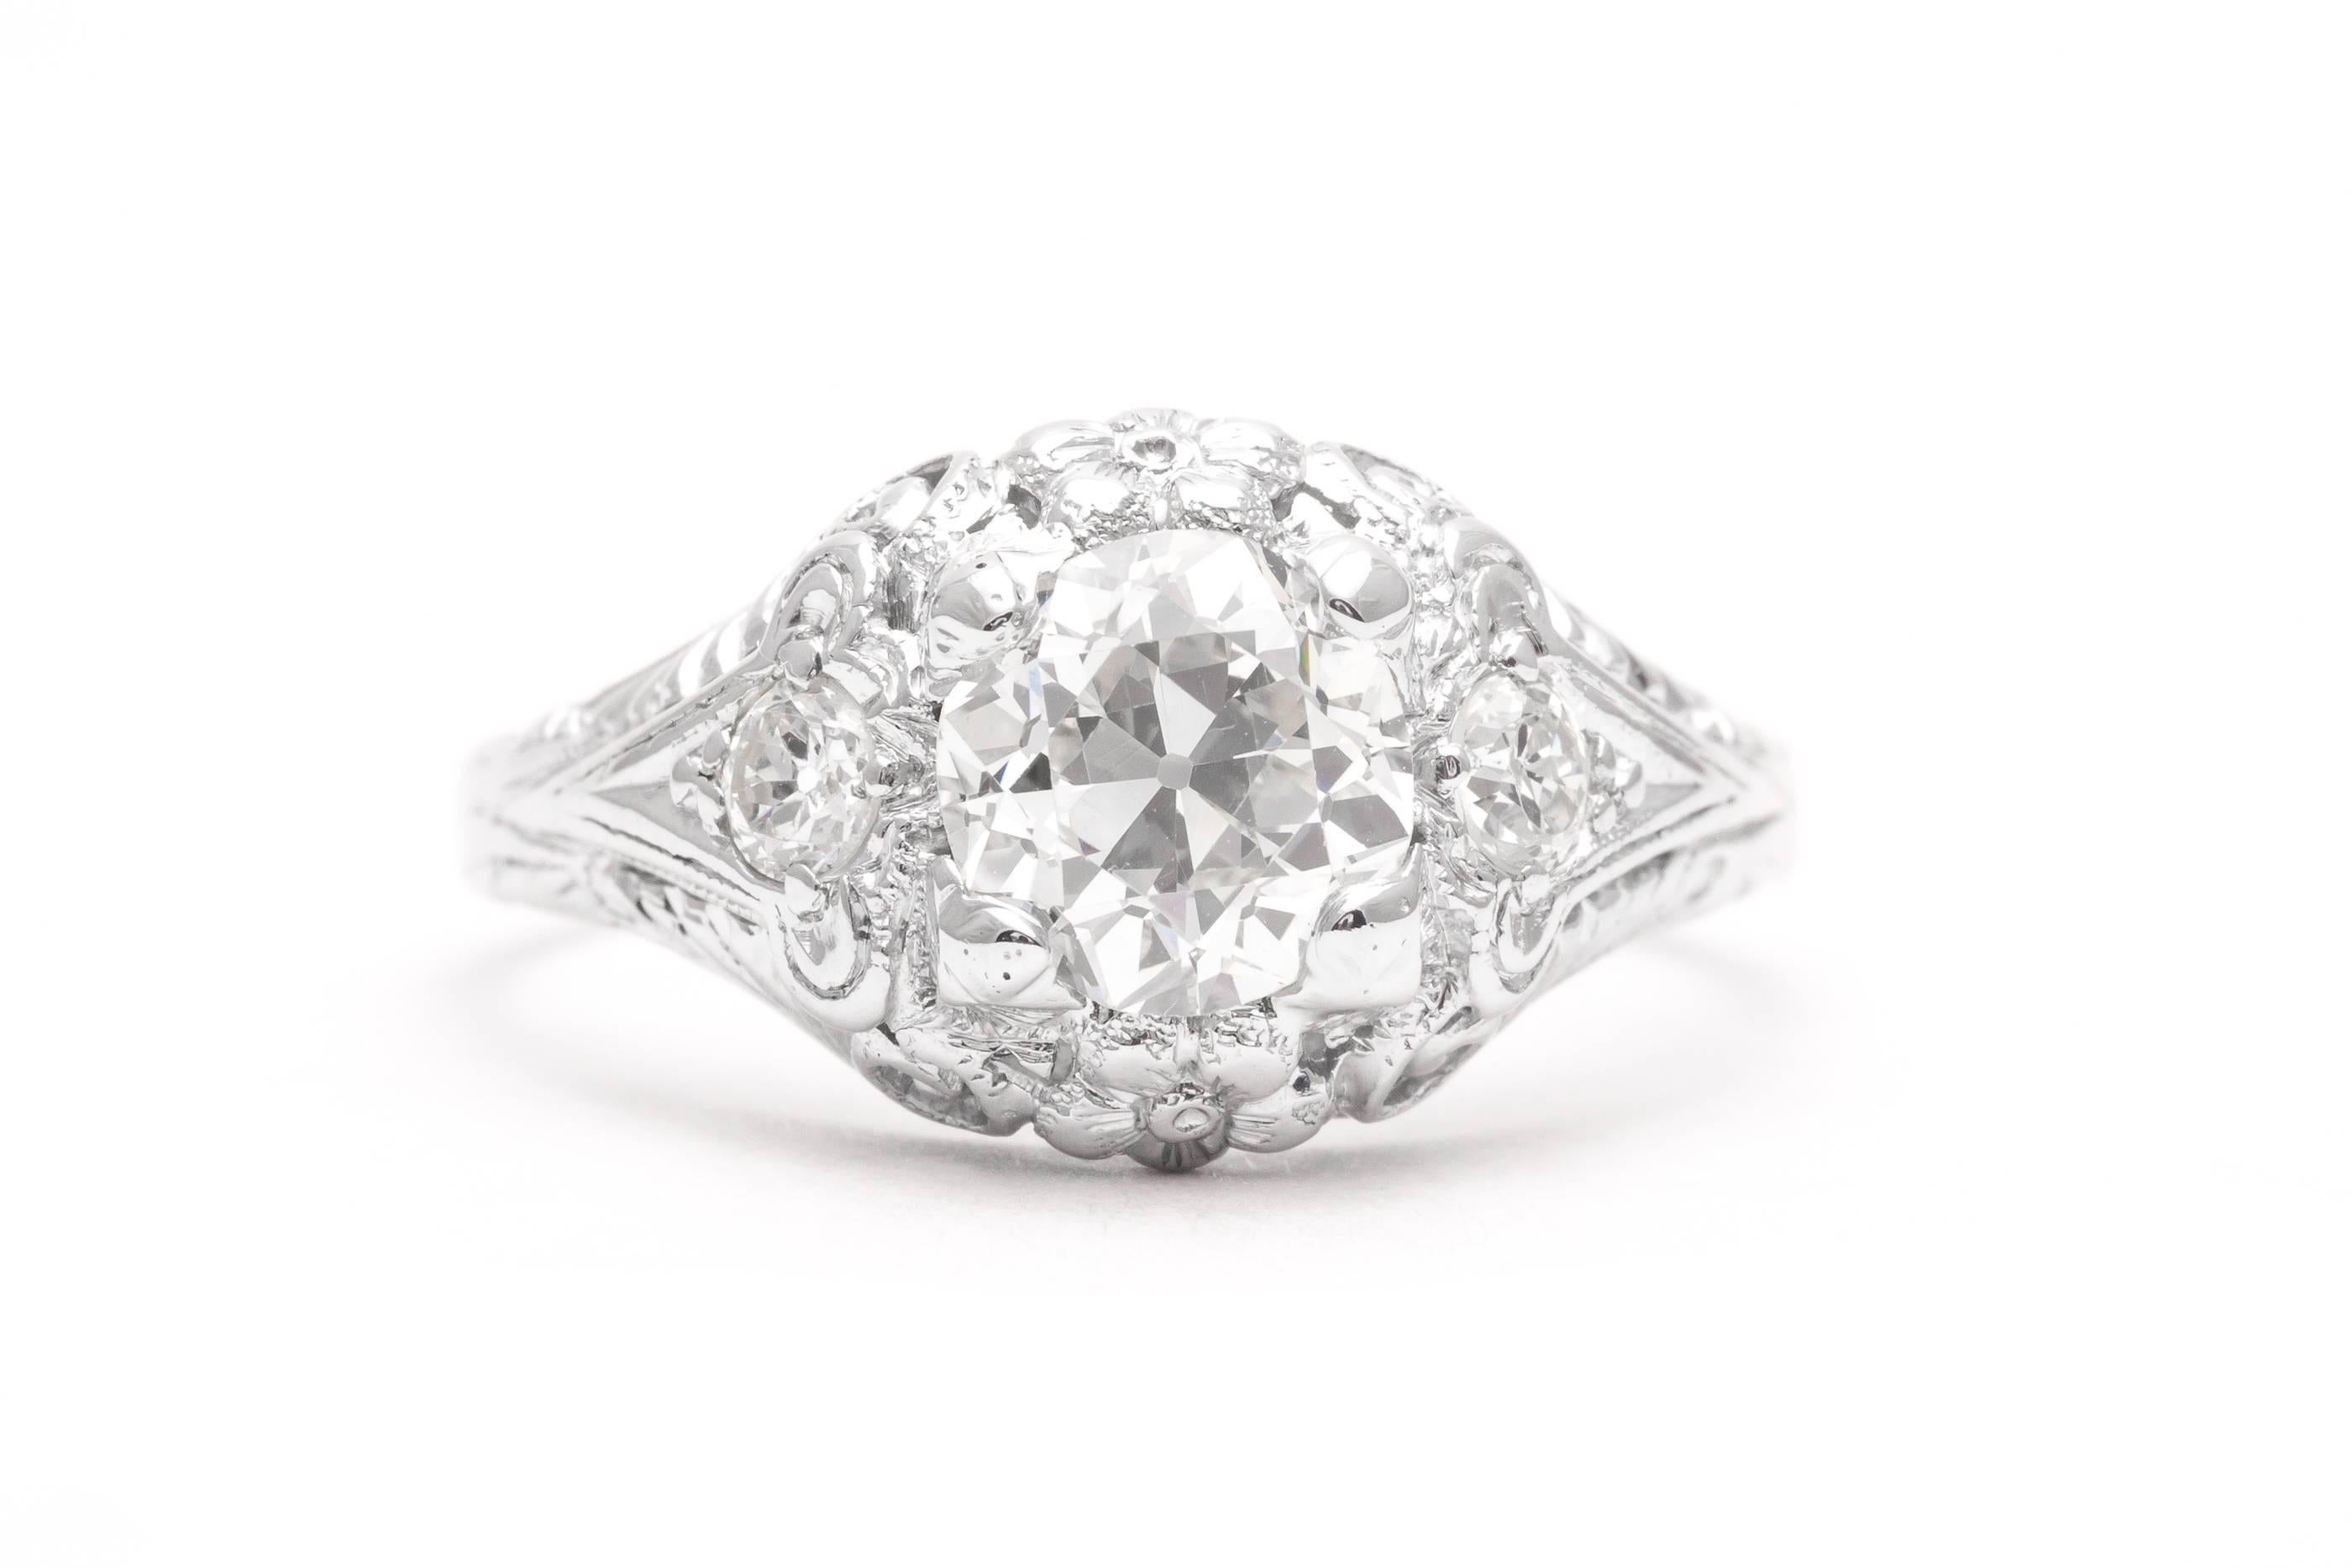 A beautiful art deco period diamond engagement ring in luxurious platinum.  Centered by a trio of old European cut diamonds this ring features beautiful hand pierced filigree work throughout complemented by hand carved flowers making this ring a